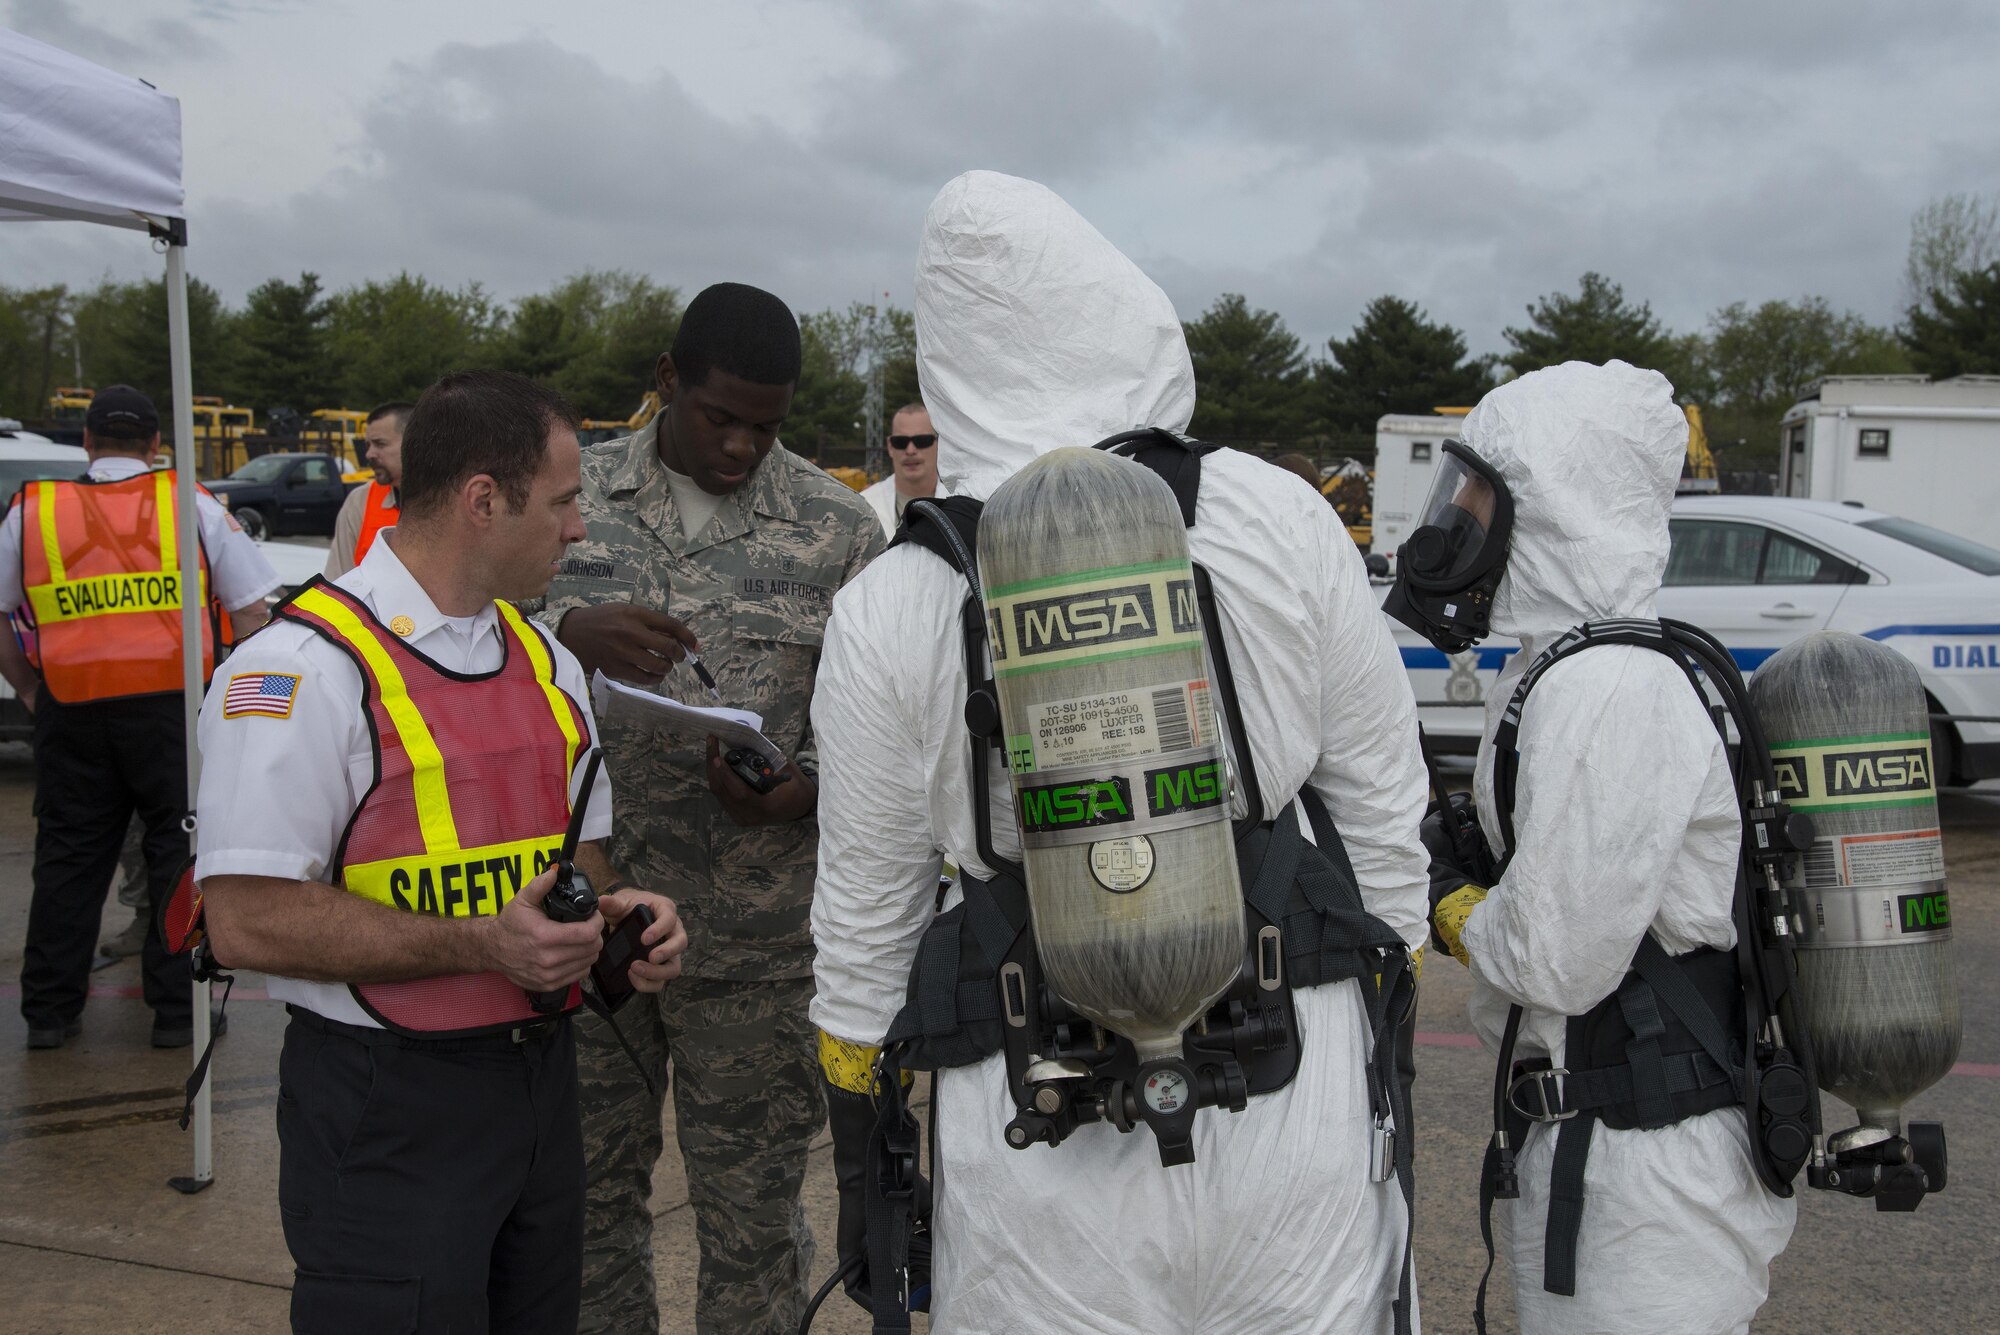 Thomas Krass, 436th Civil Engineer Squadron Fire Department assistant fire chief, debriefs Senior Airmen Alexander Delfs and Jorge Rijo, 436th Aerospace Medicine Squadron bioenvironmental engineering technicians, at a temporary command center during a fuel spill exercise April 20, 2017, at Dover Air Force Base, Del. The bioenvironmental engineers relayed pertinent information about the simulated fuel spill, which allowed the on-scene commander to make informed command decisions. (U.S. Air Force photo by Senior Airman Aaron J. Jenne)